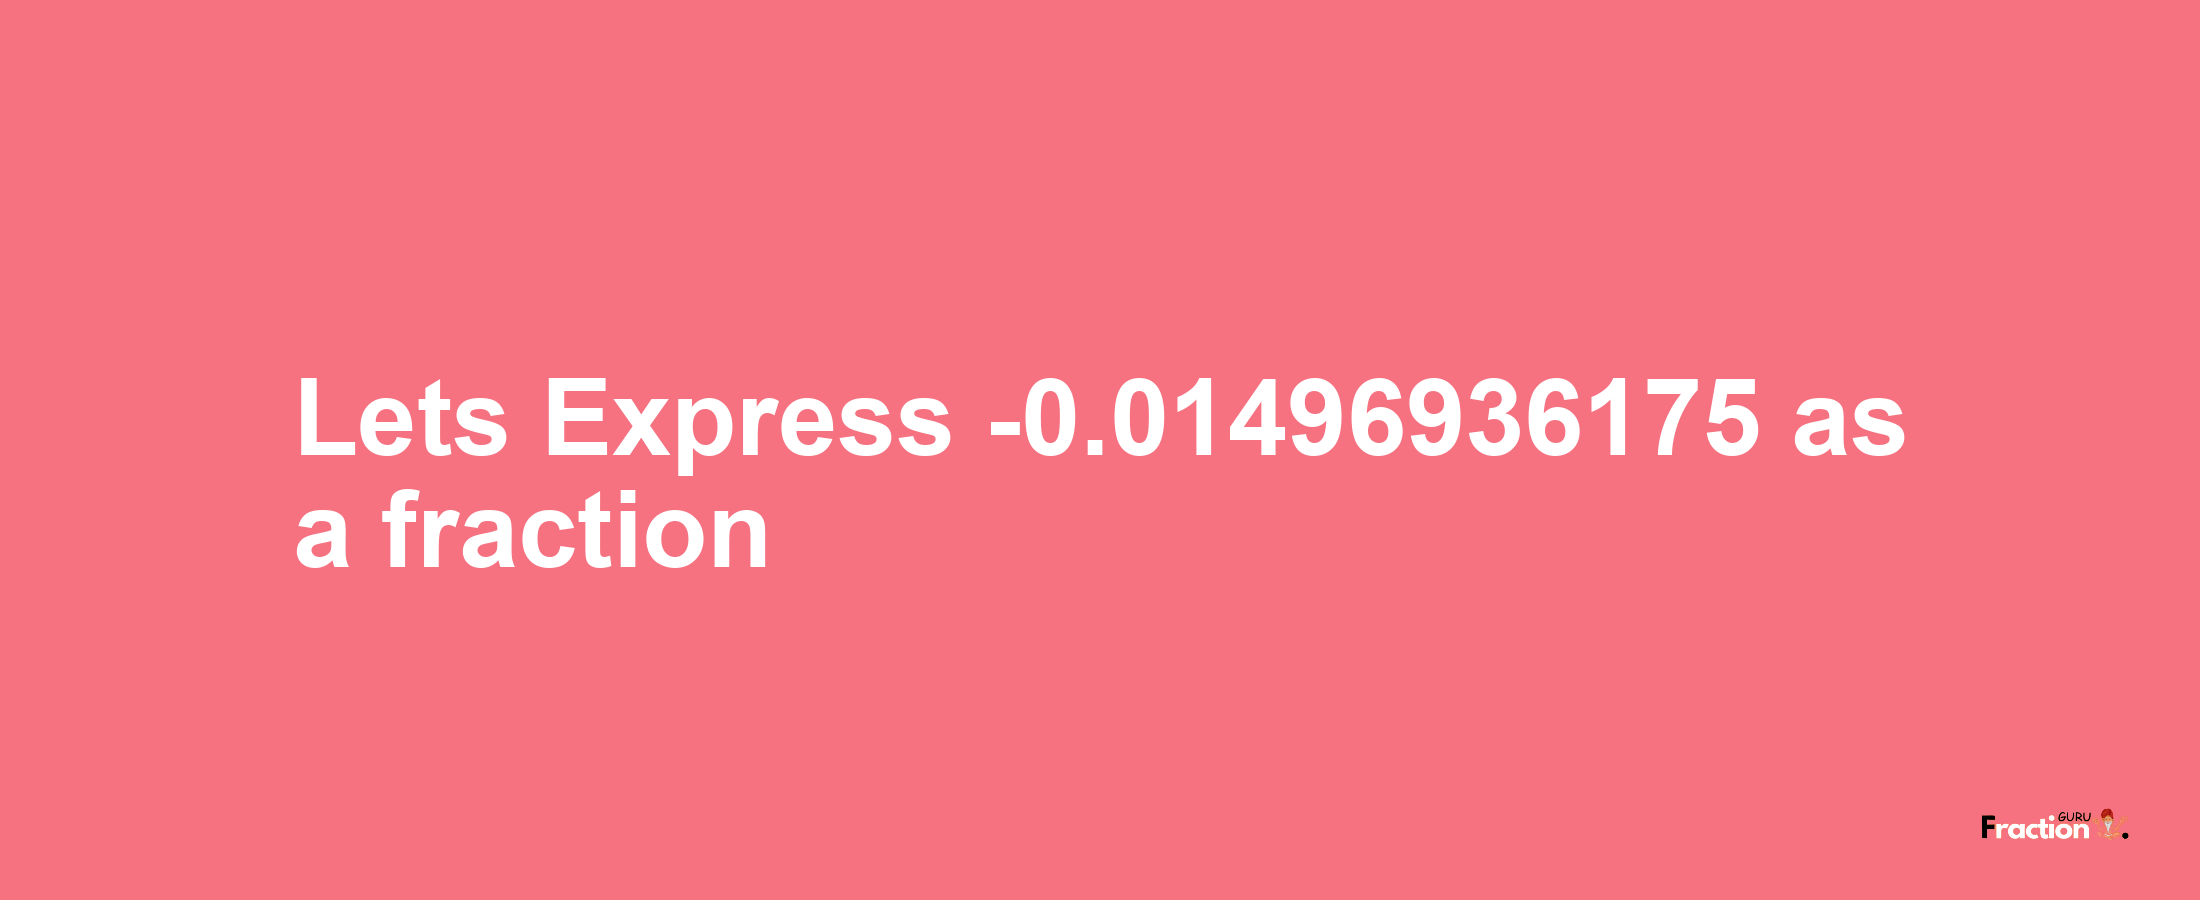 Lets Express -0.01496936175 as afraction